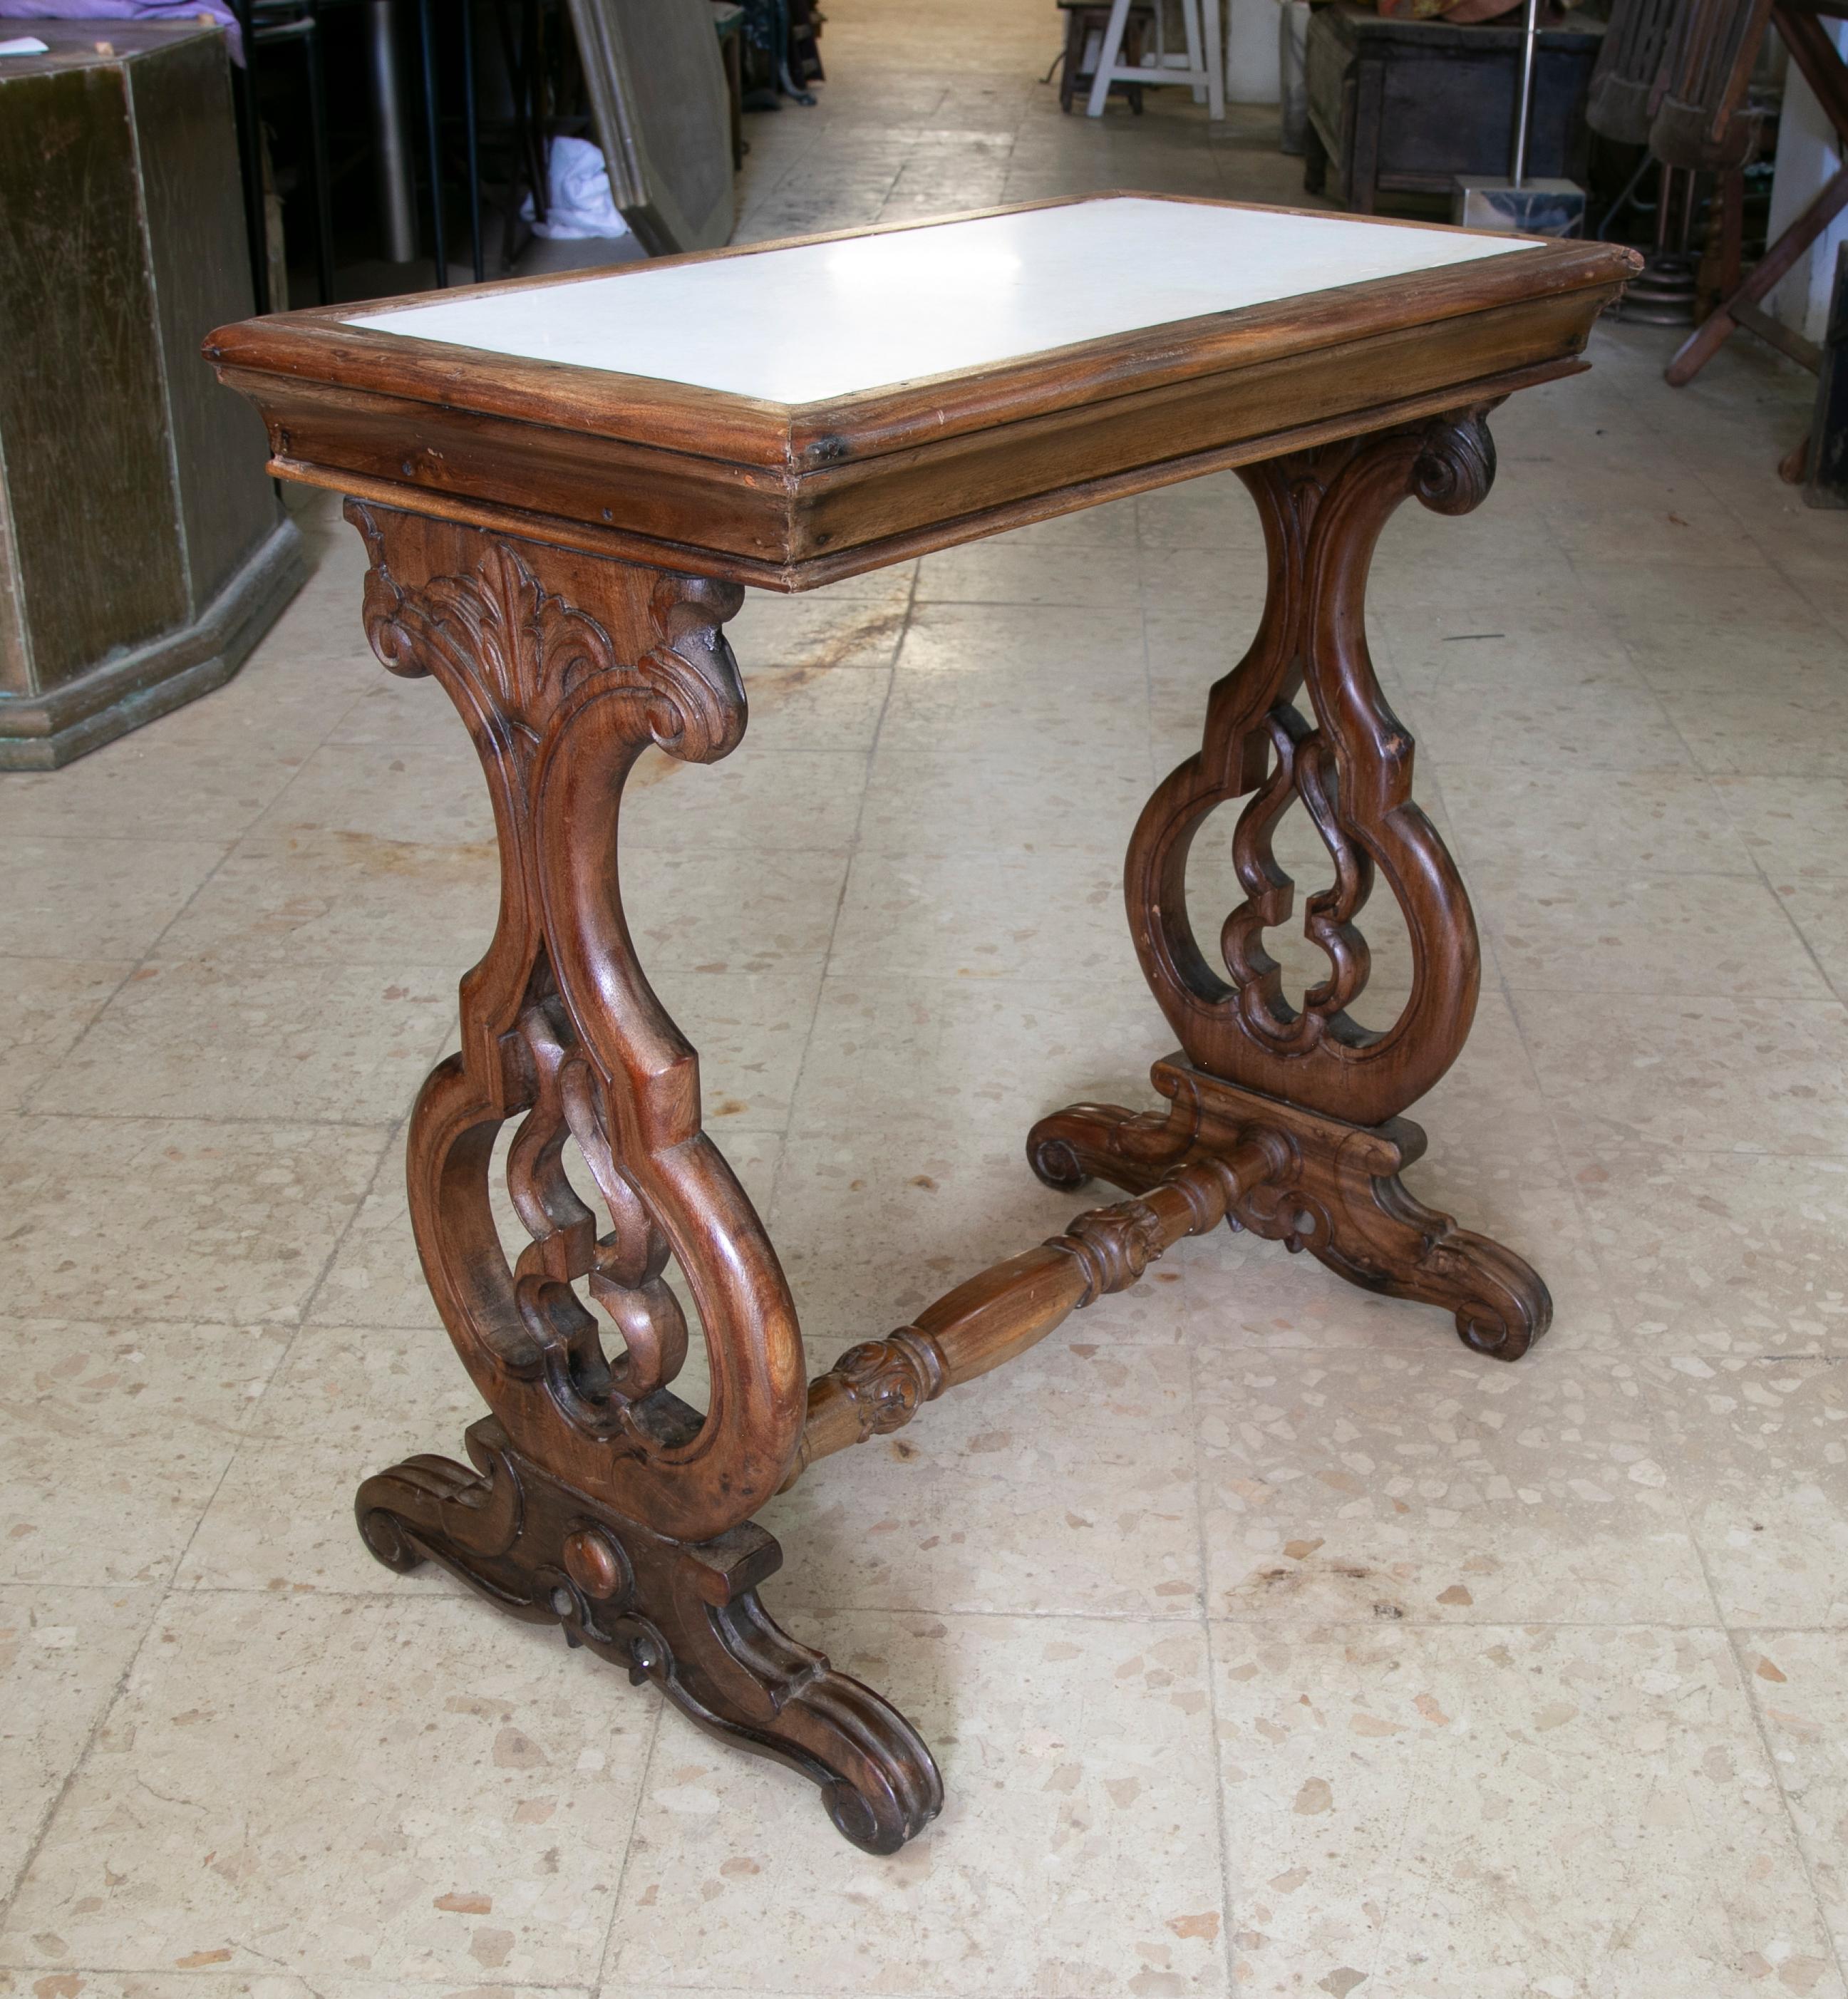 20th Century Handcarved Wooden Table with Inlaid Marble Top For Sale